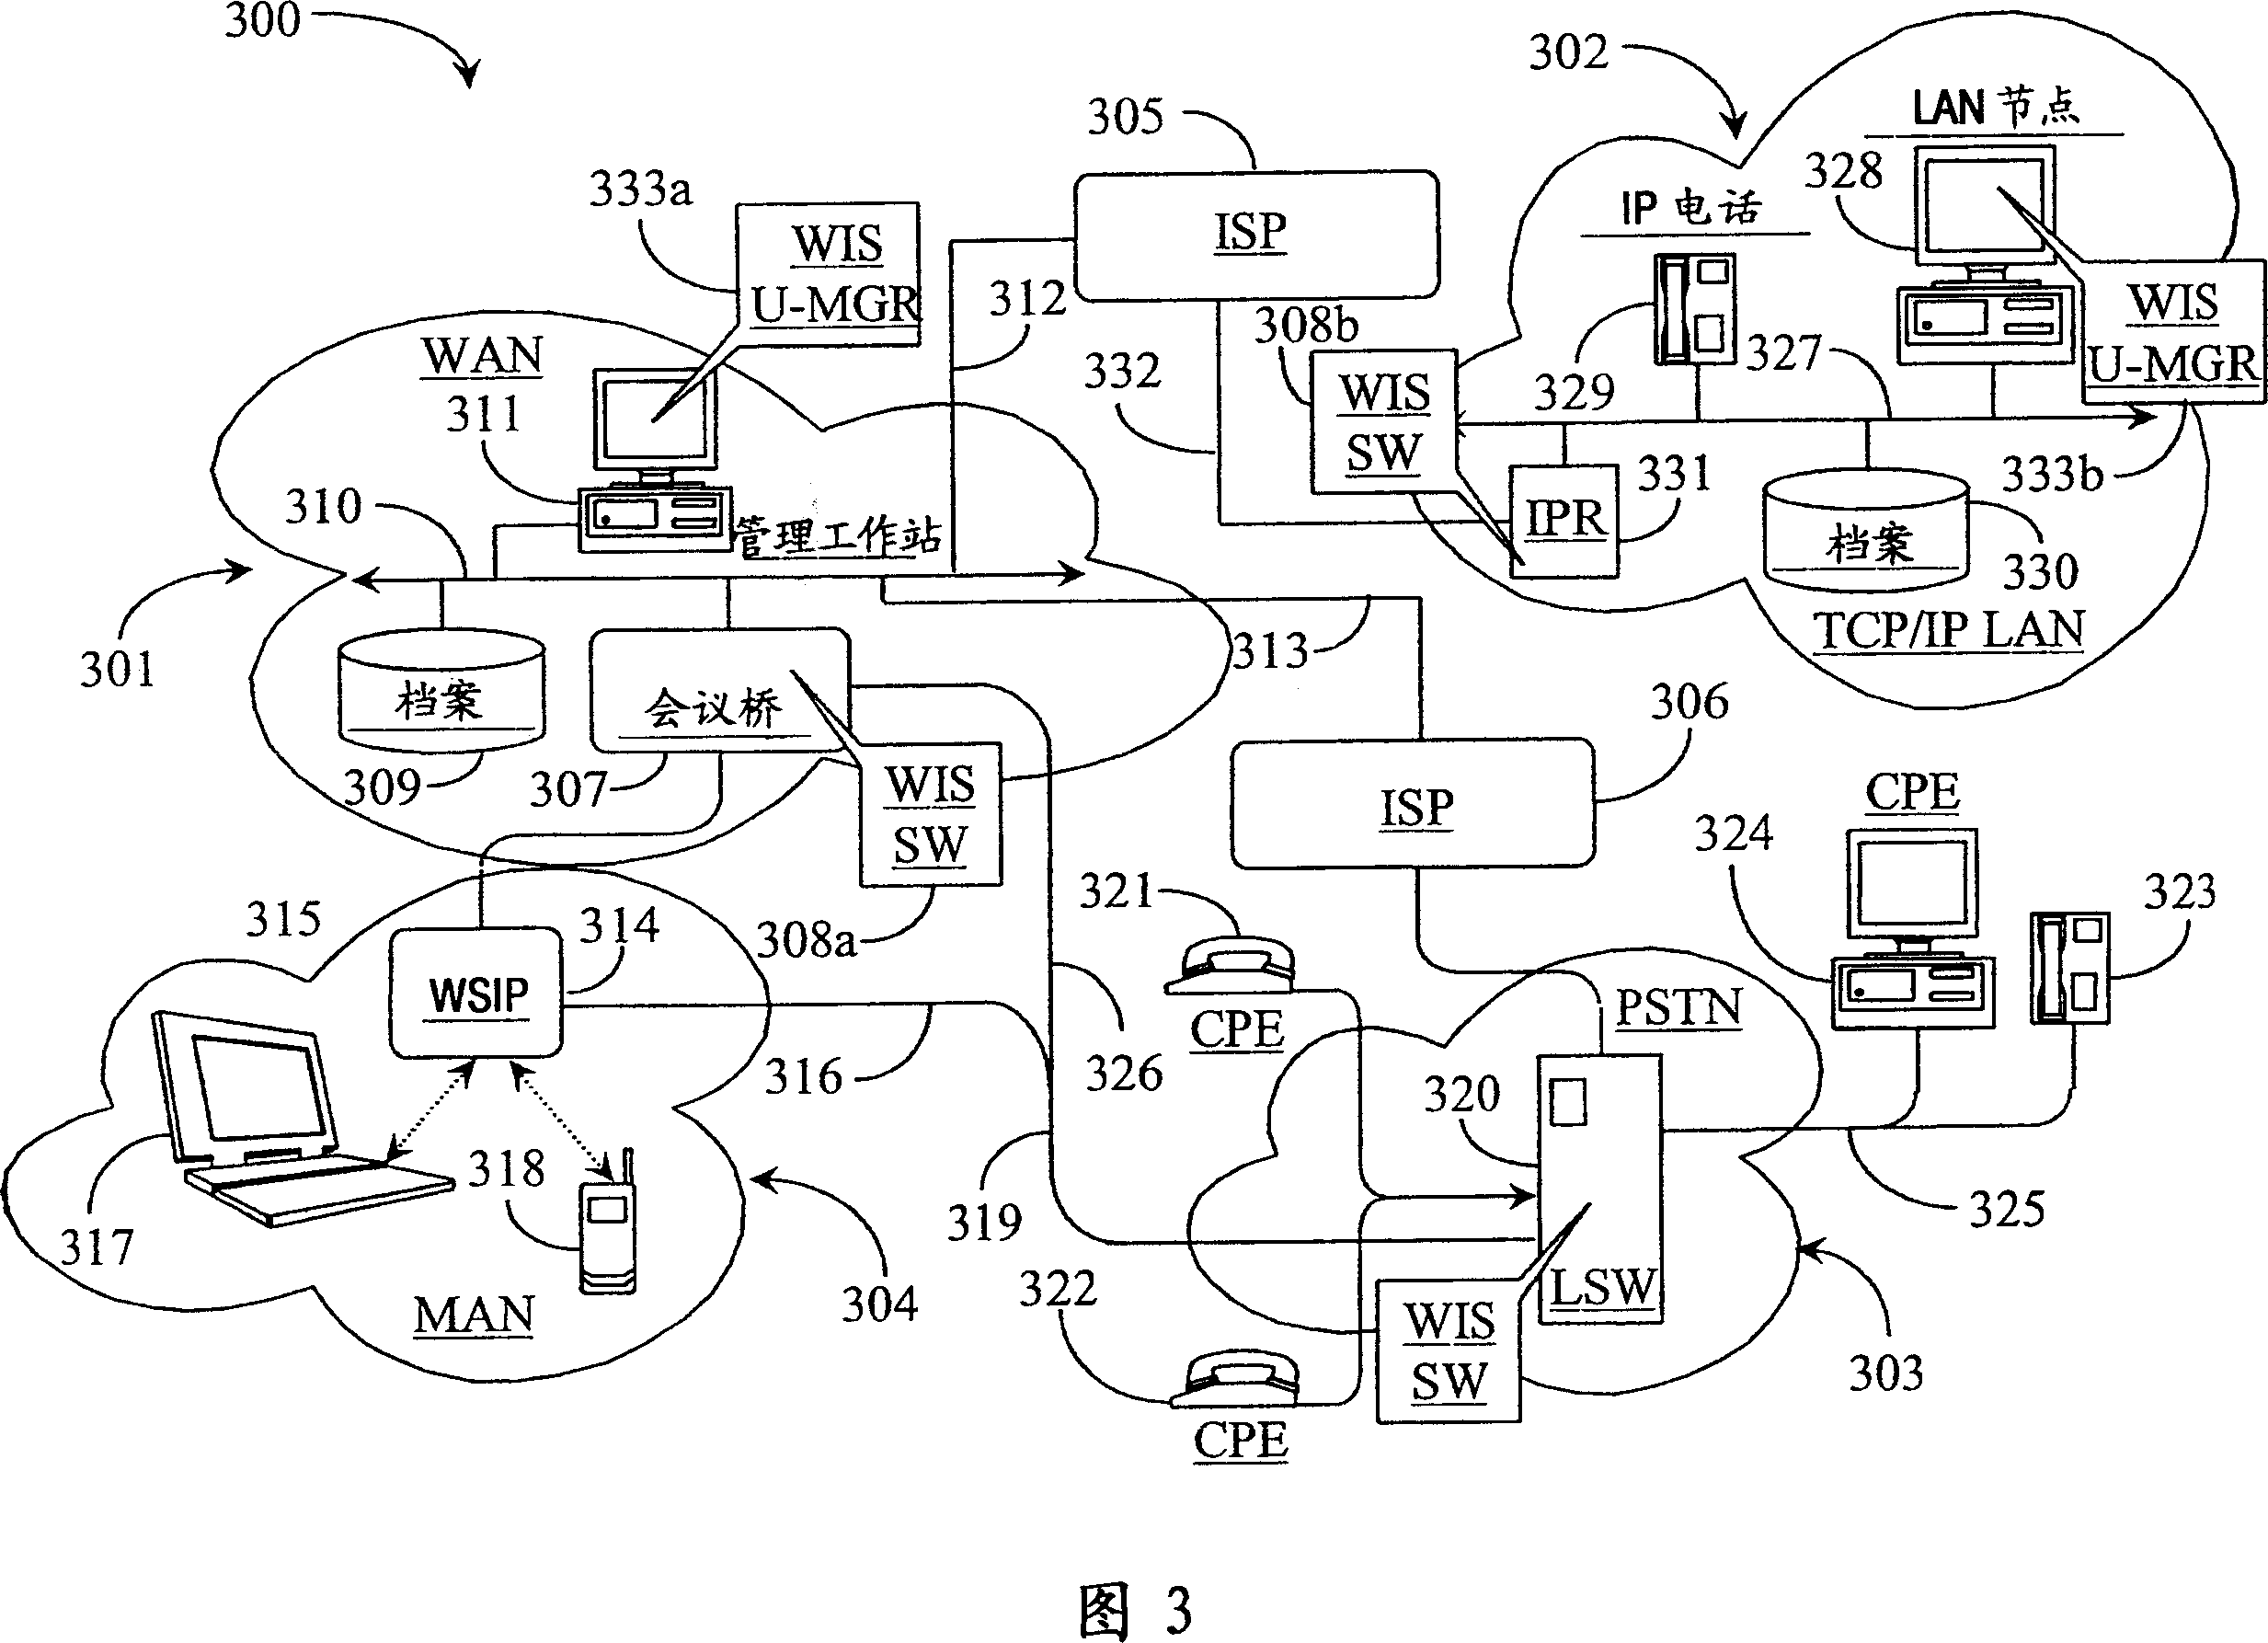 System and methods for enabling applications of who-is-speaking (WIS) signals